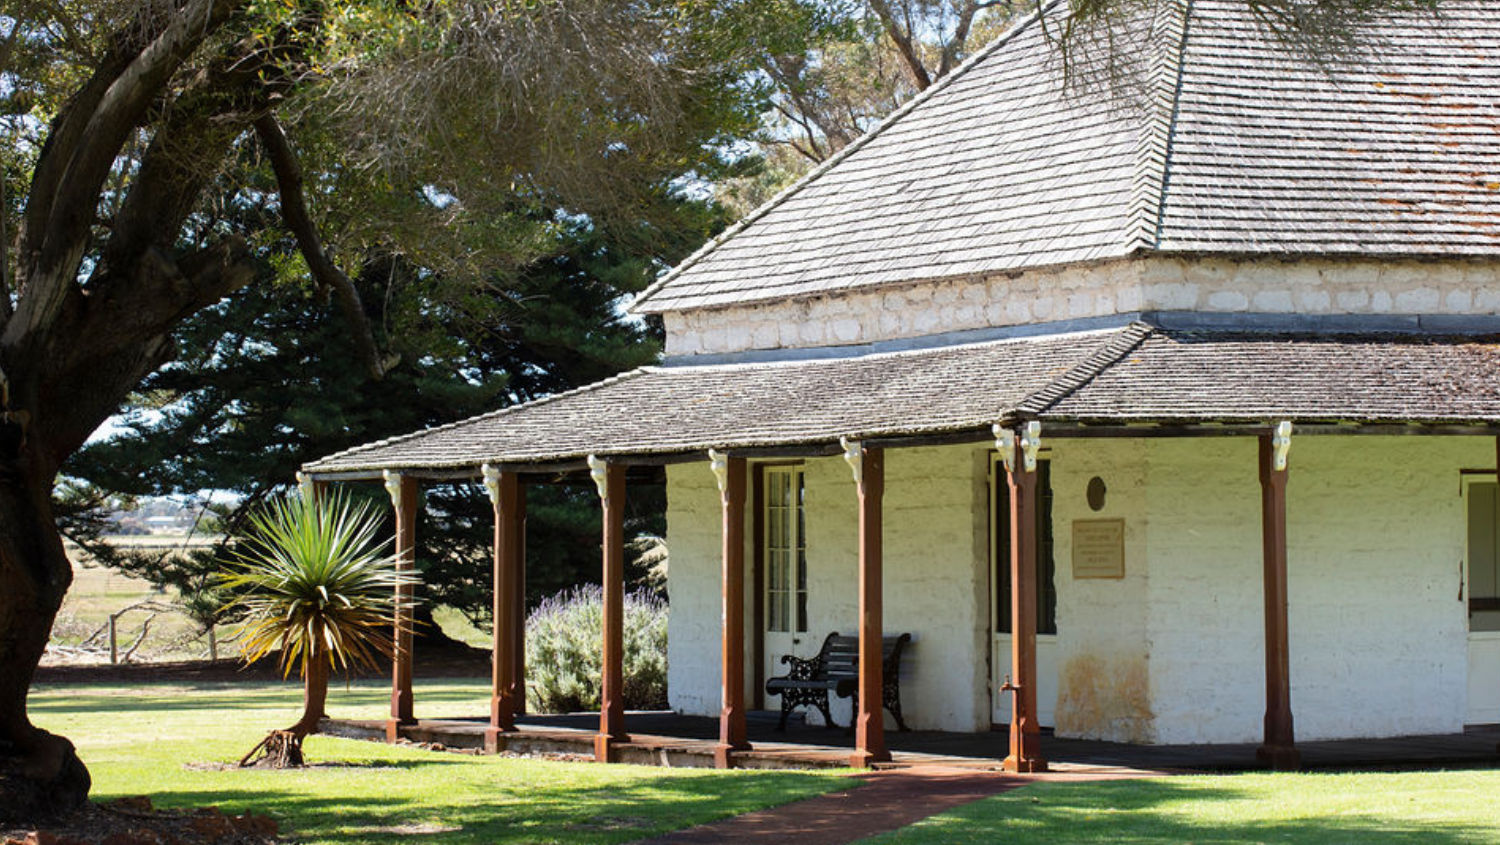 Image of the historical Wonnerup House, located in Busselton.